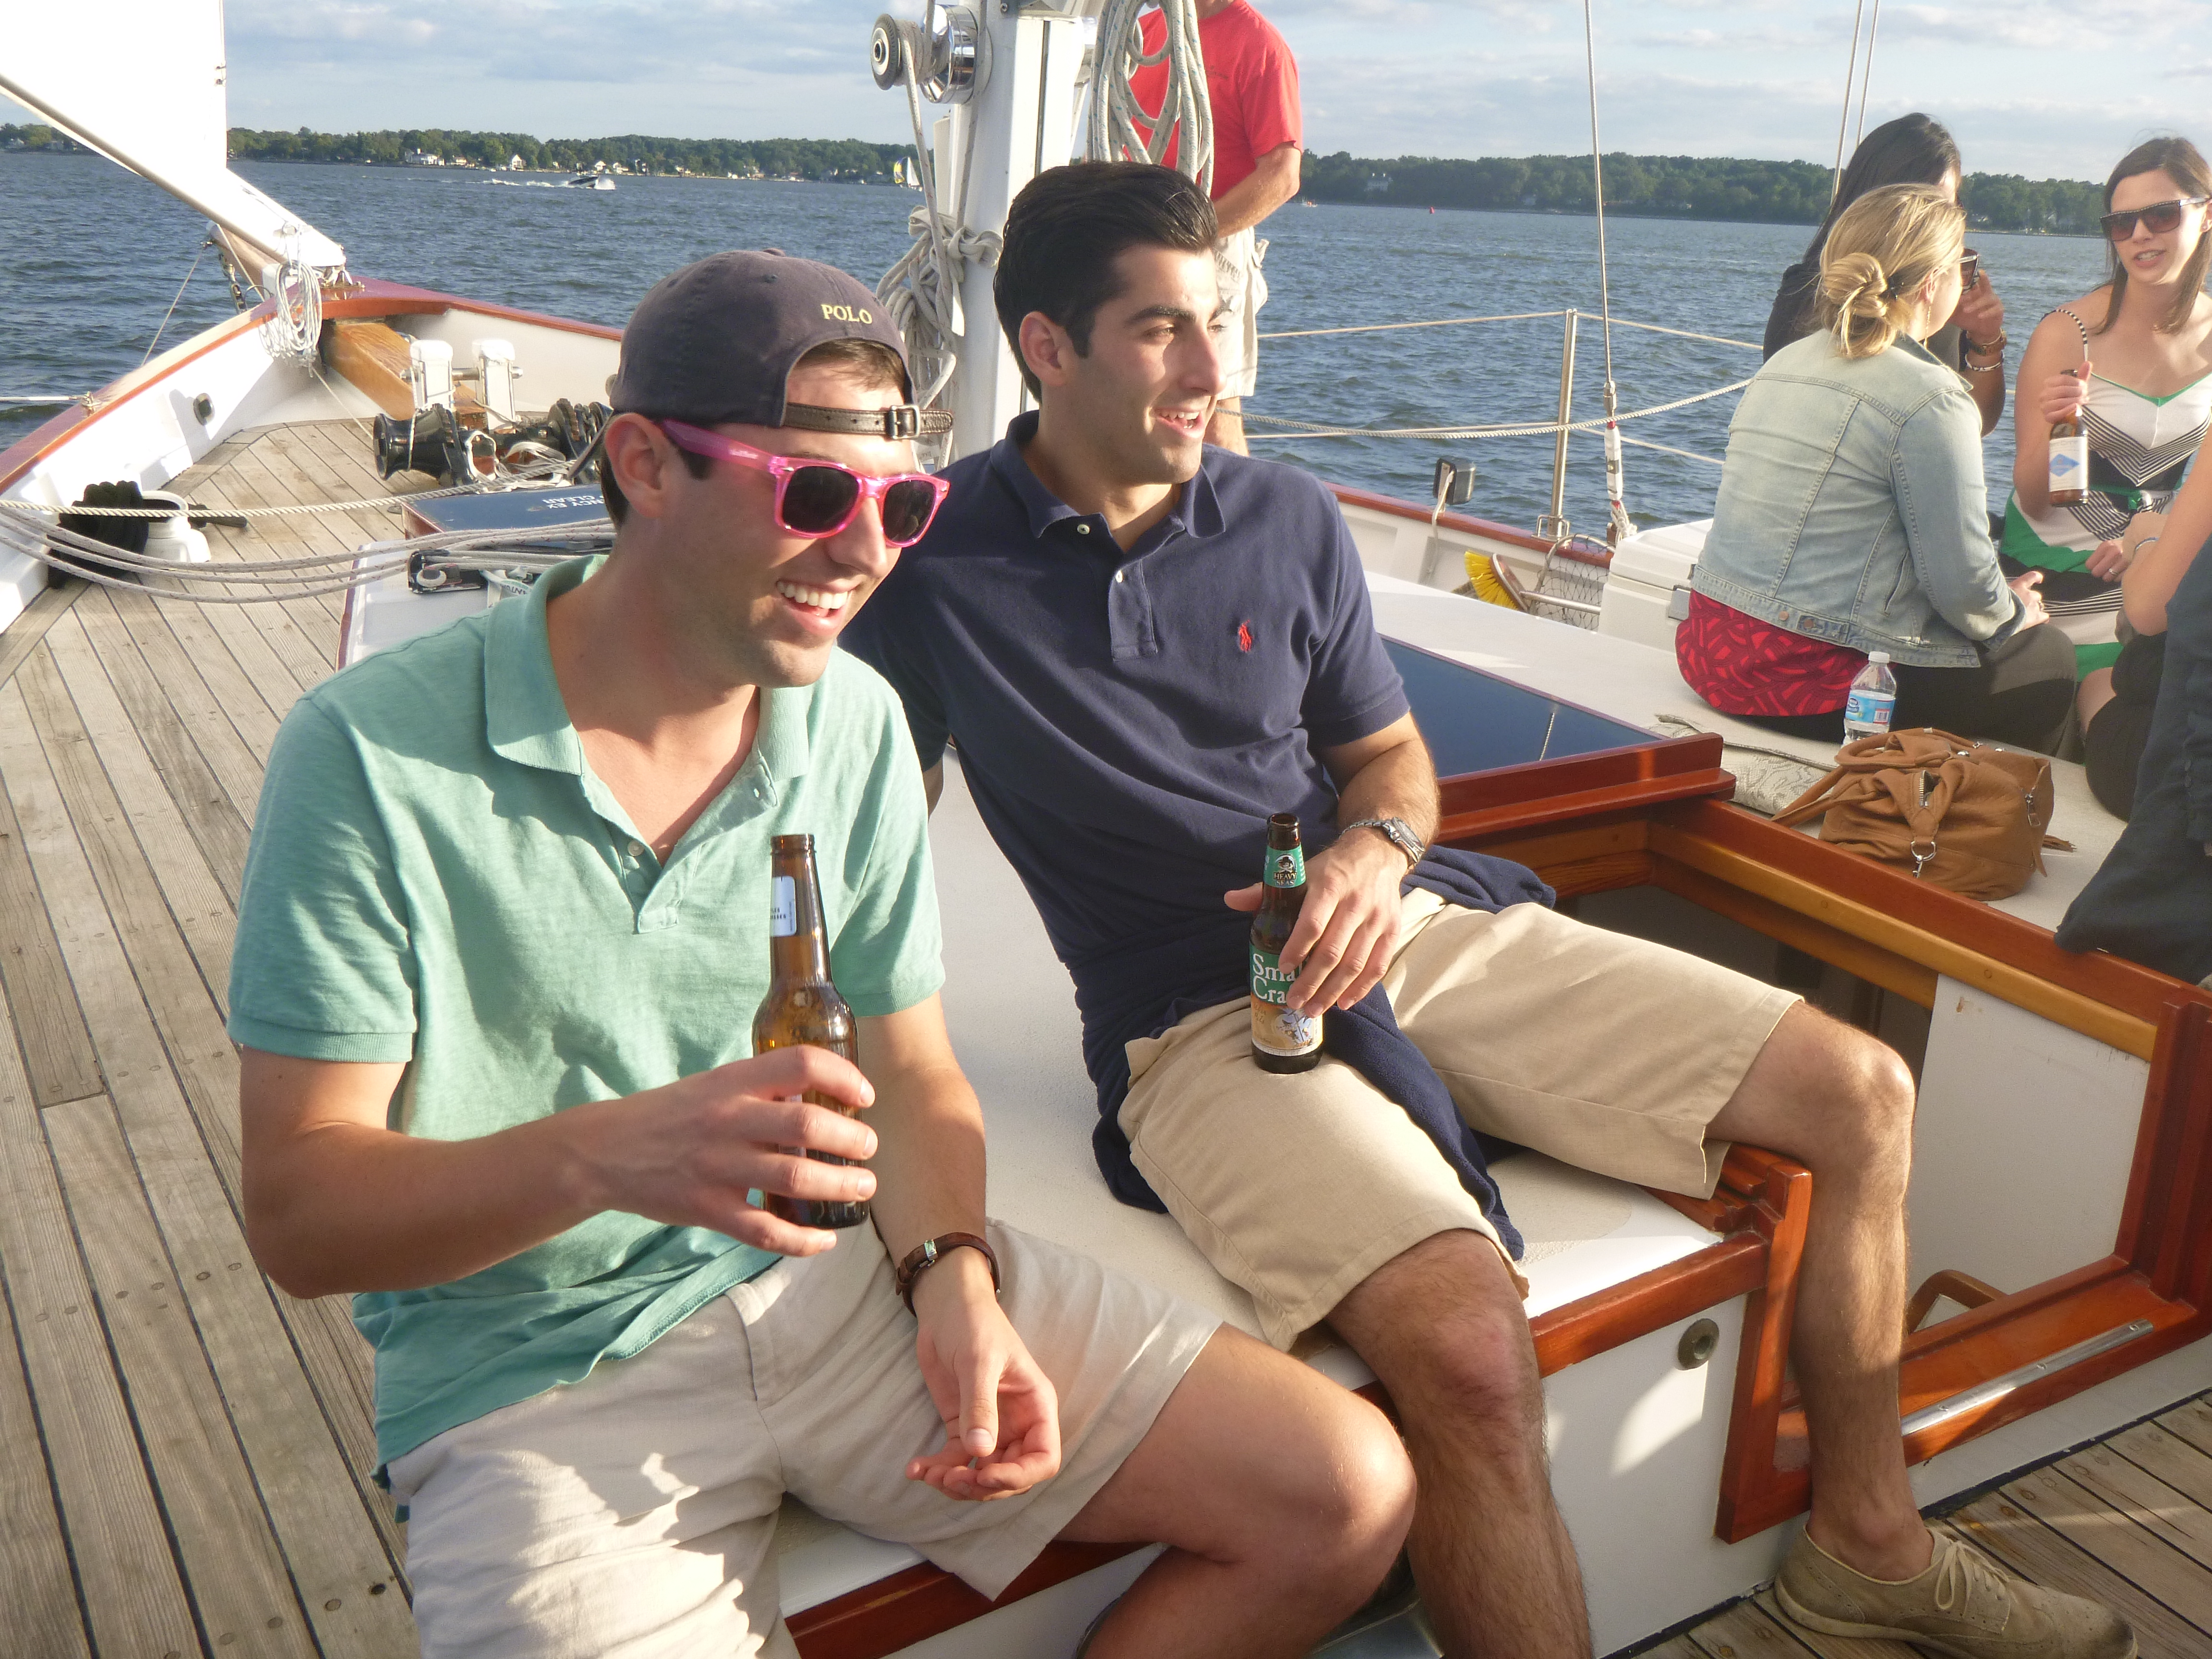 Two gentlemen enjoying beverages and a sunny sail